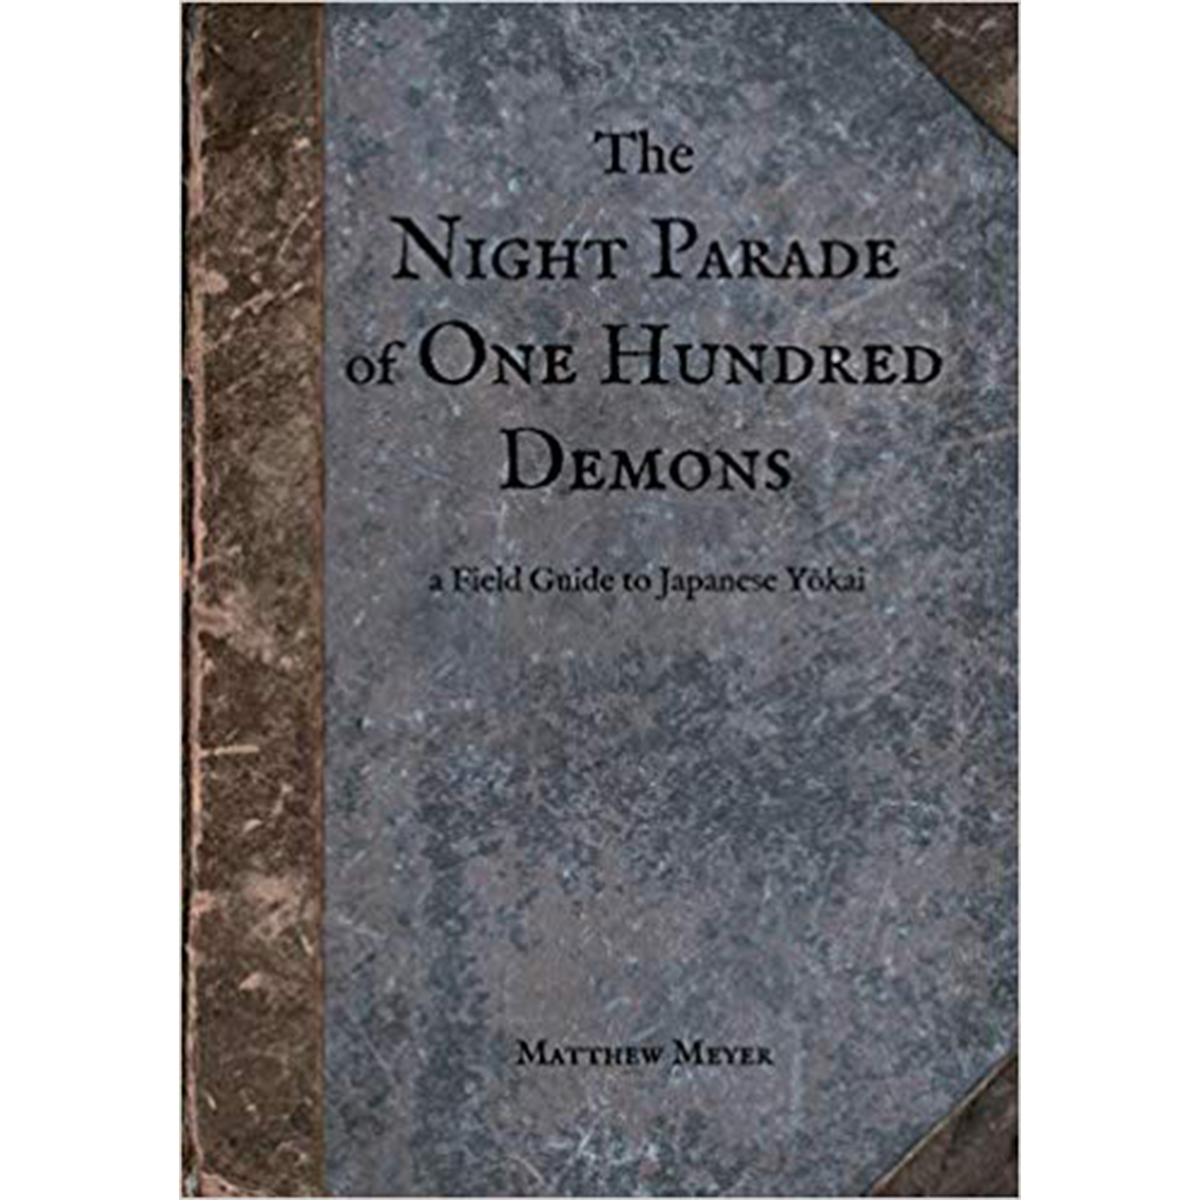 The Night Parade of One Hundred Demons:  A Field Guide to Japanese Yokai